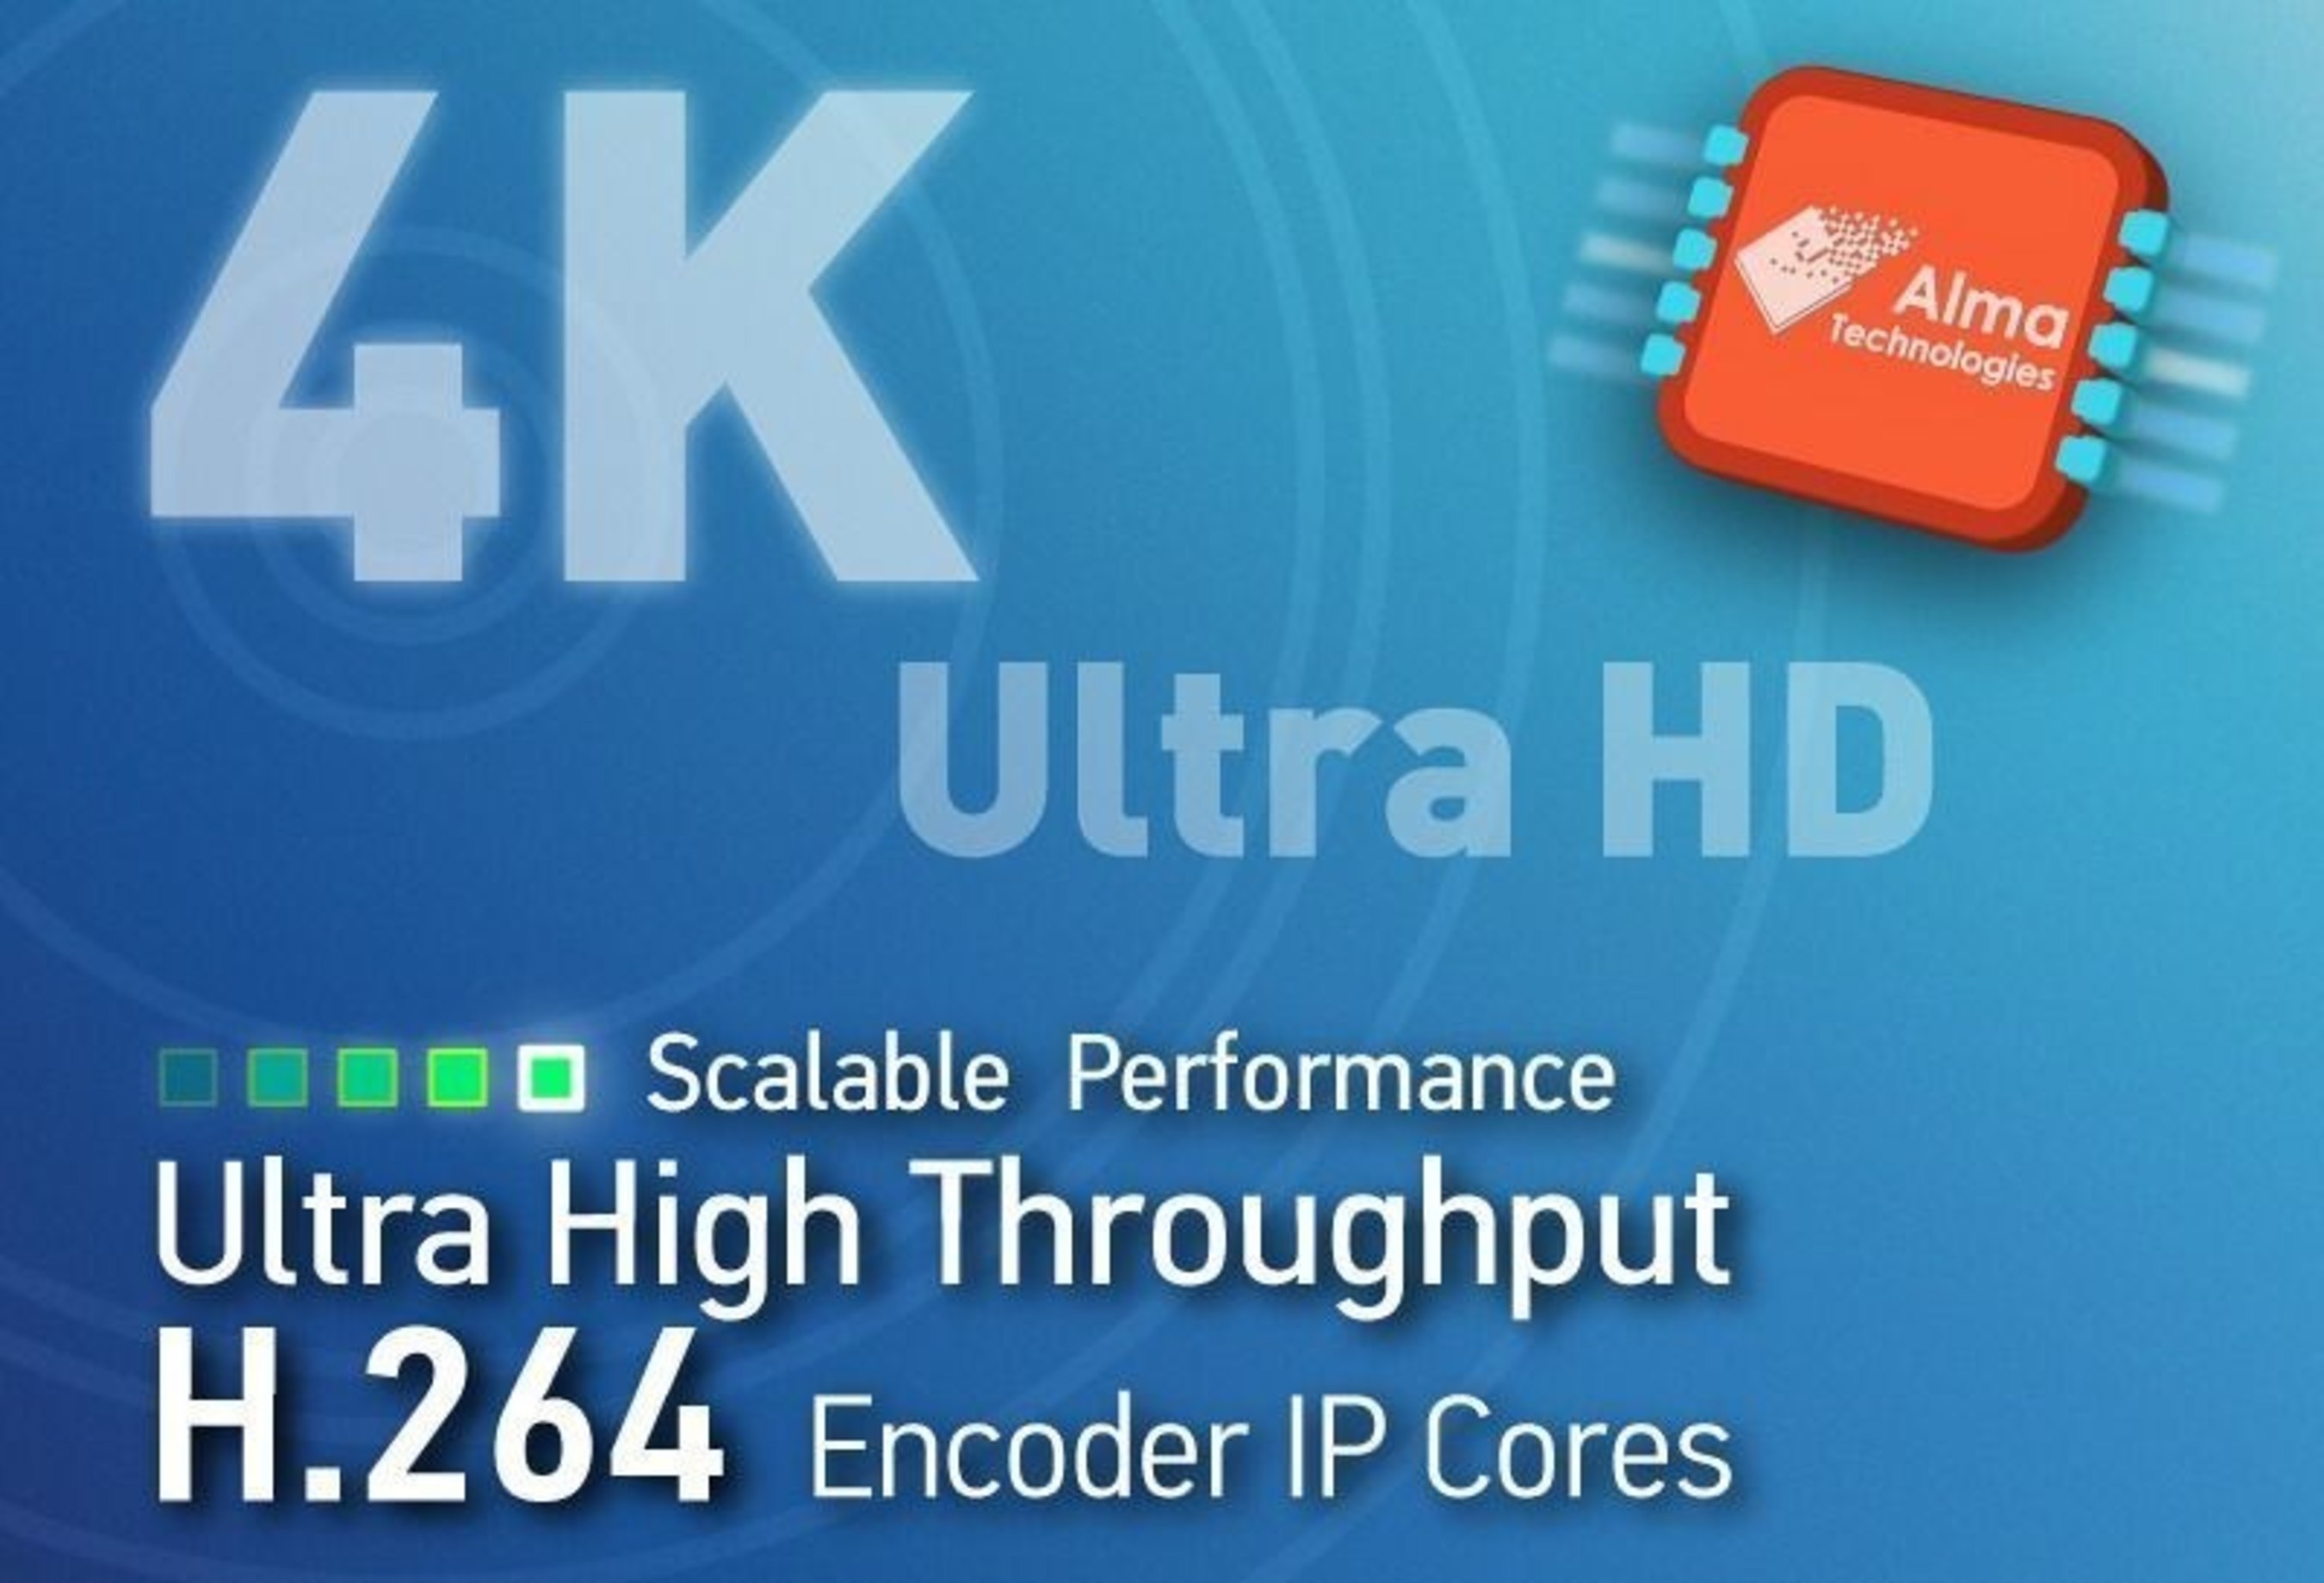 Alma Technologies announces the addition of three new Ultra High Throughput H.264 encoders to its UHT Image & Video Compression IP product line. This new family of scalable H.264 encoders offers progressively increasing levels of compression and enables 4K resolutions in power- and cost-effective FPGA and ASIC implementations. Each of the three new H.264 encoders can be configured to support Baseline, Main and High profiles, 4:2:0 and 4:2:2 chroma sampling, and up to 12-bit per component color depth.